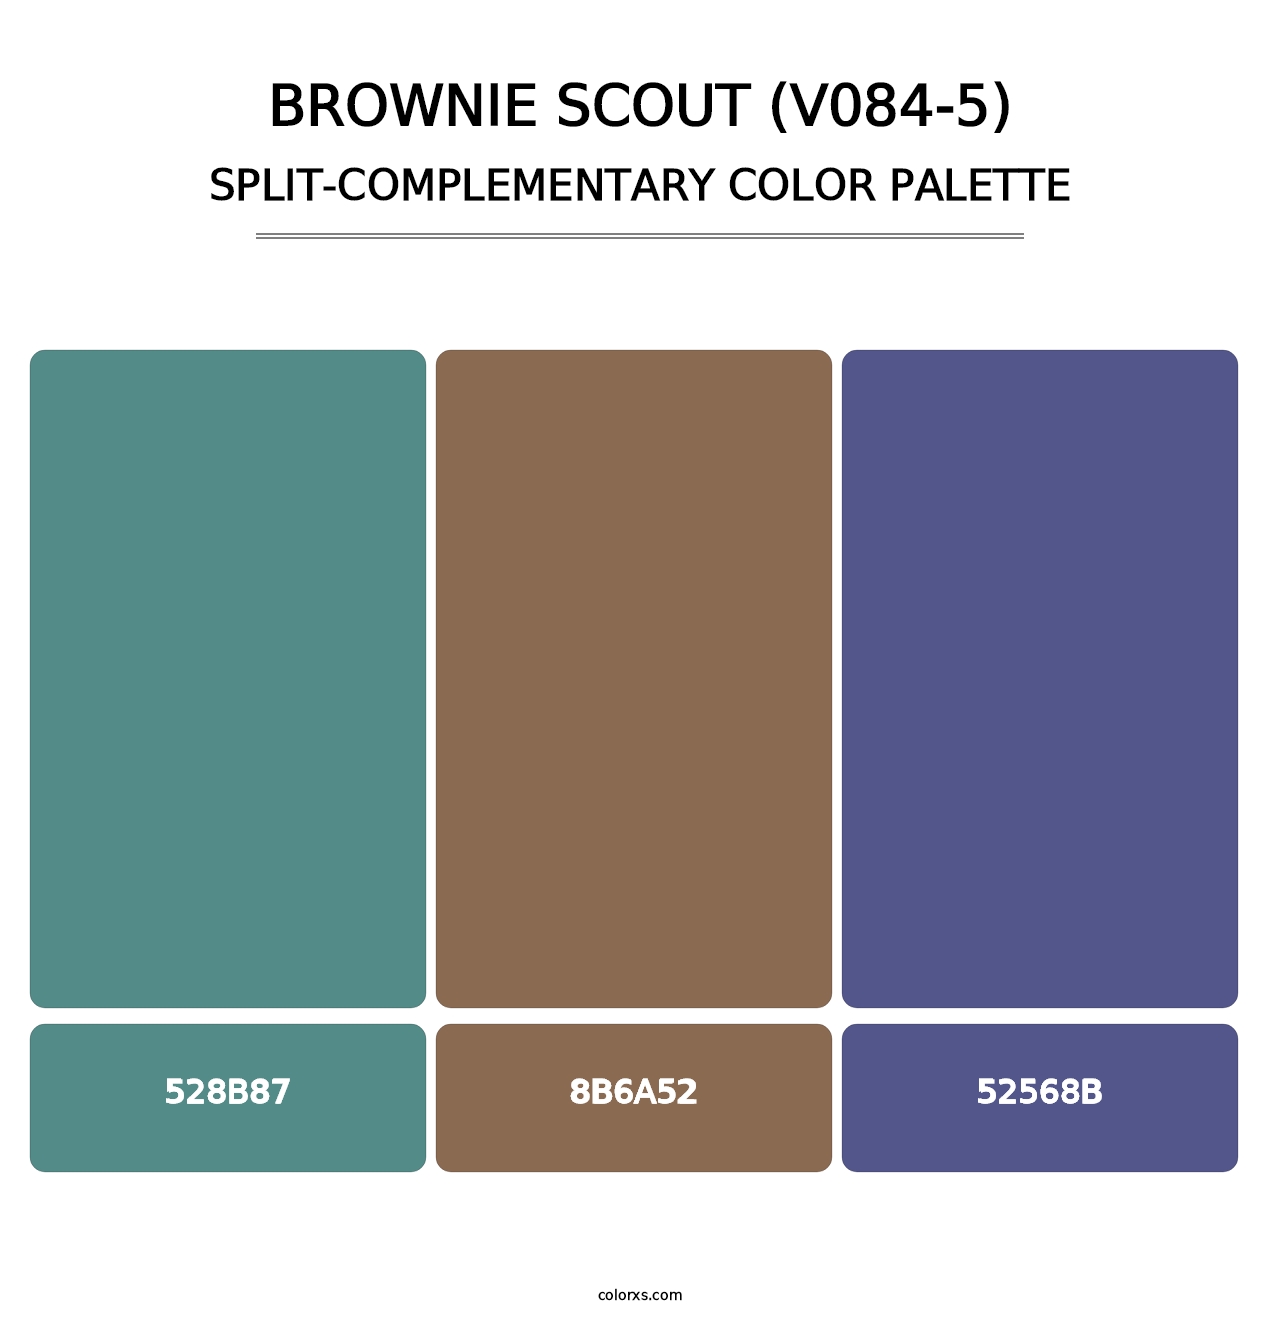 Brownie Scout (V084-5) - Split-Complementary Color Palette